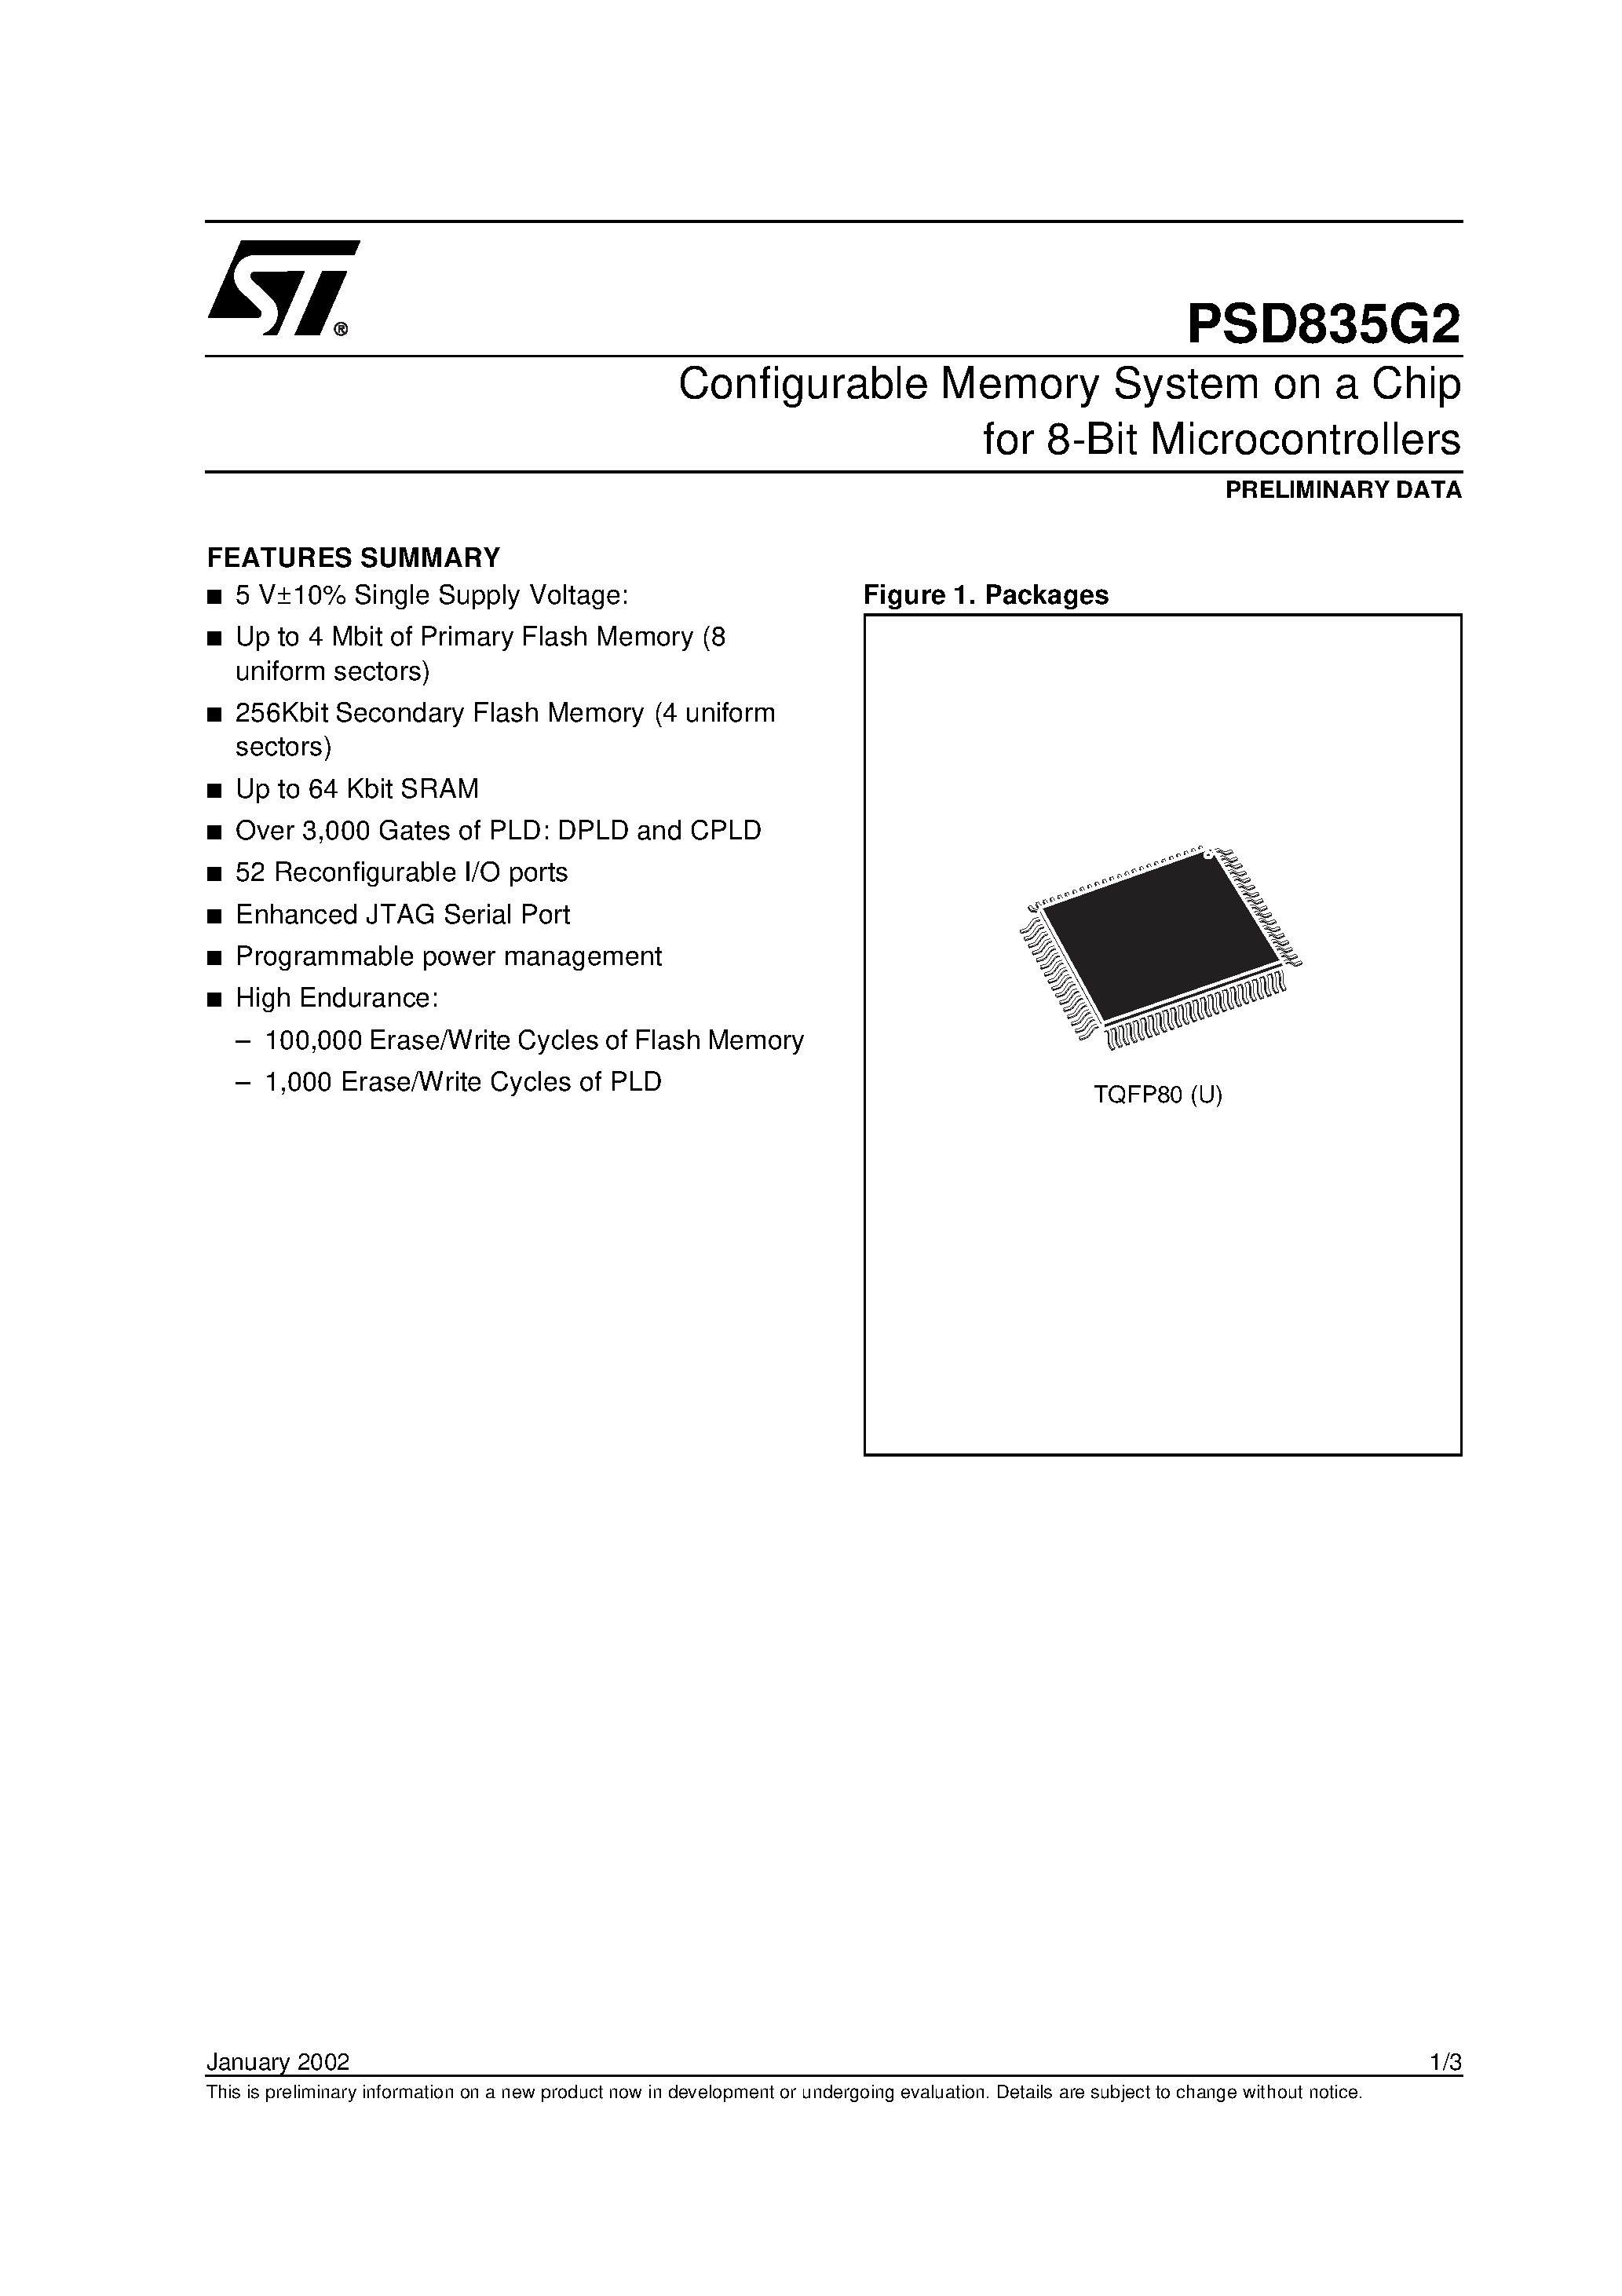 Datasheet PSD835F2V-A-70MI - Configurable Memory System on a Chip for 8-Bit Microcontrollers page 1